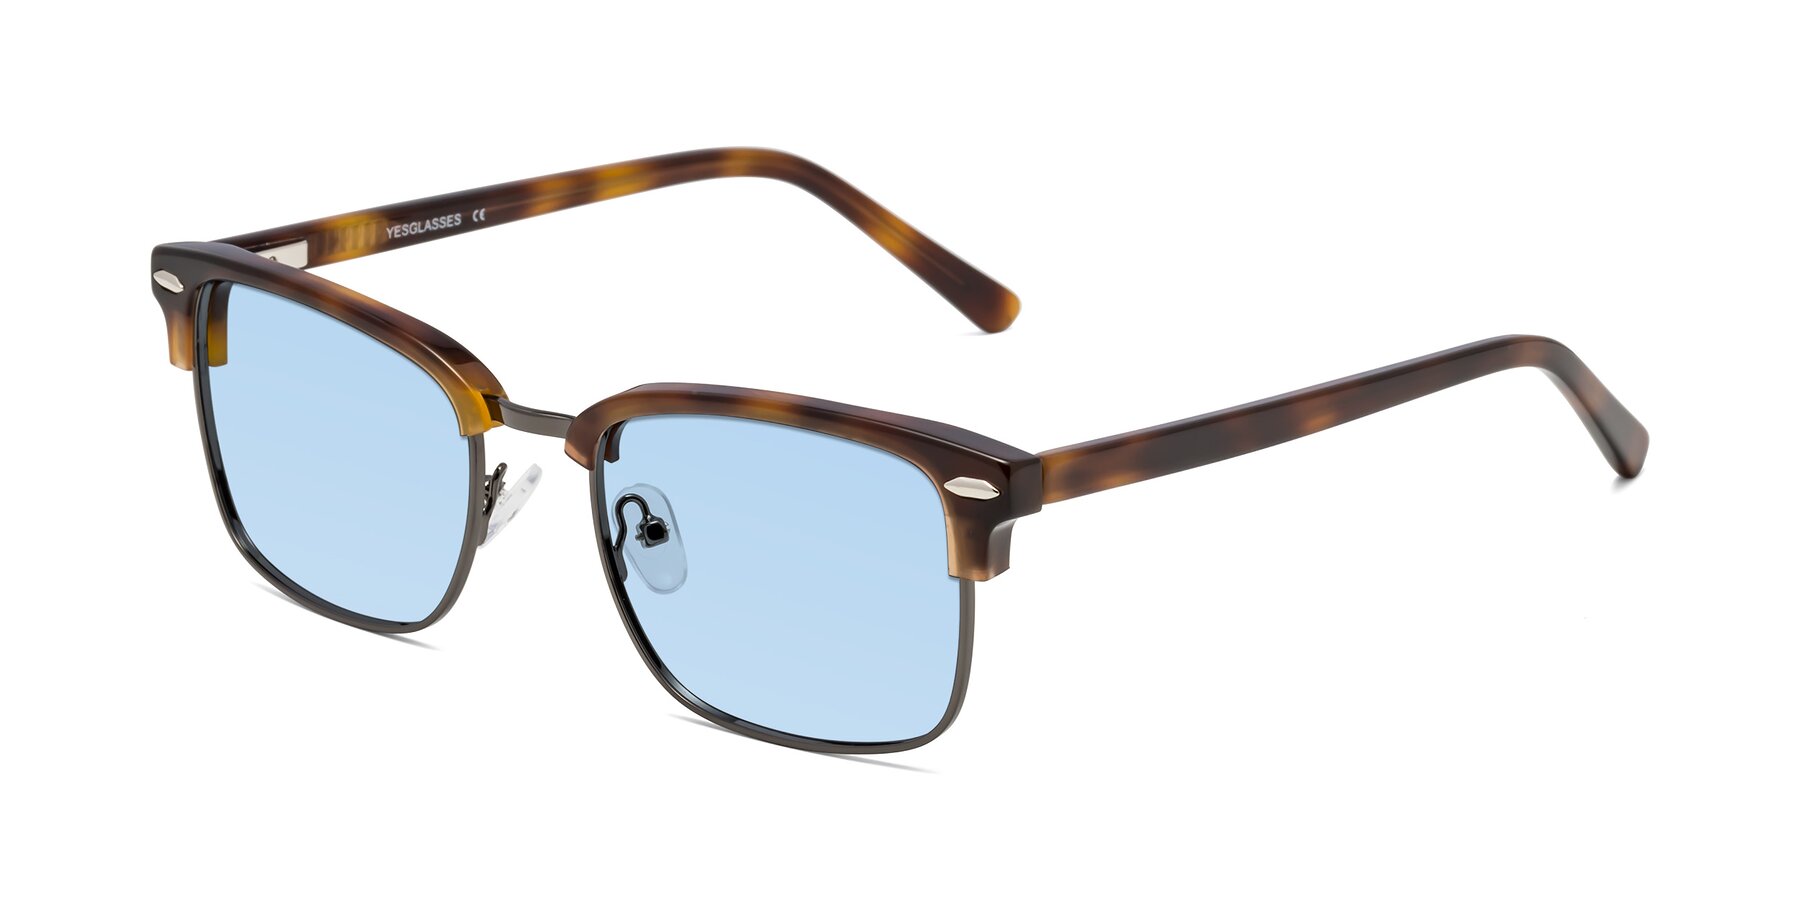 Angle of 17464 in Tortoise/ Gunmetal with Light Blue Tinted Lenses